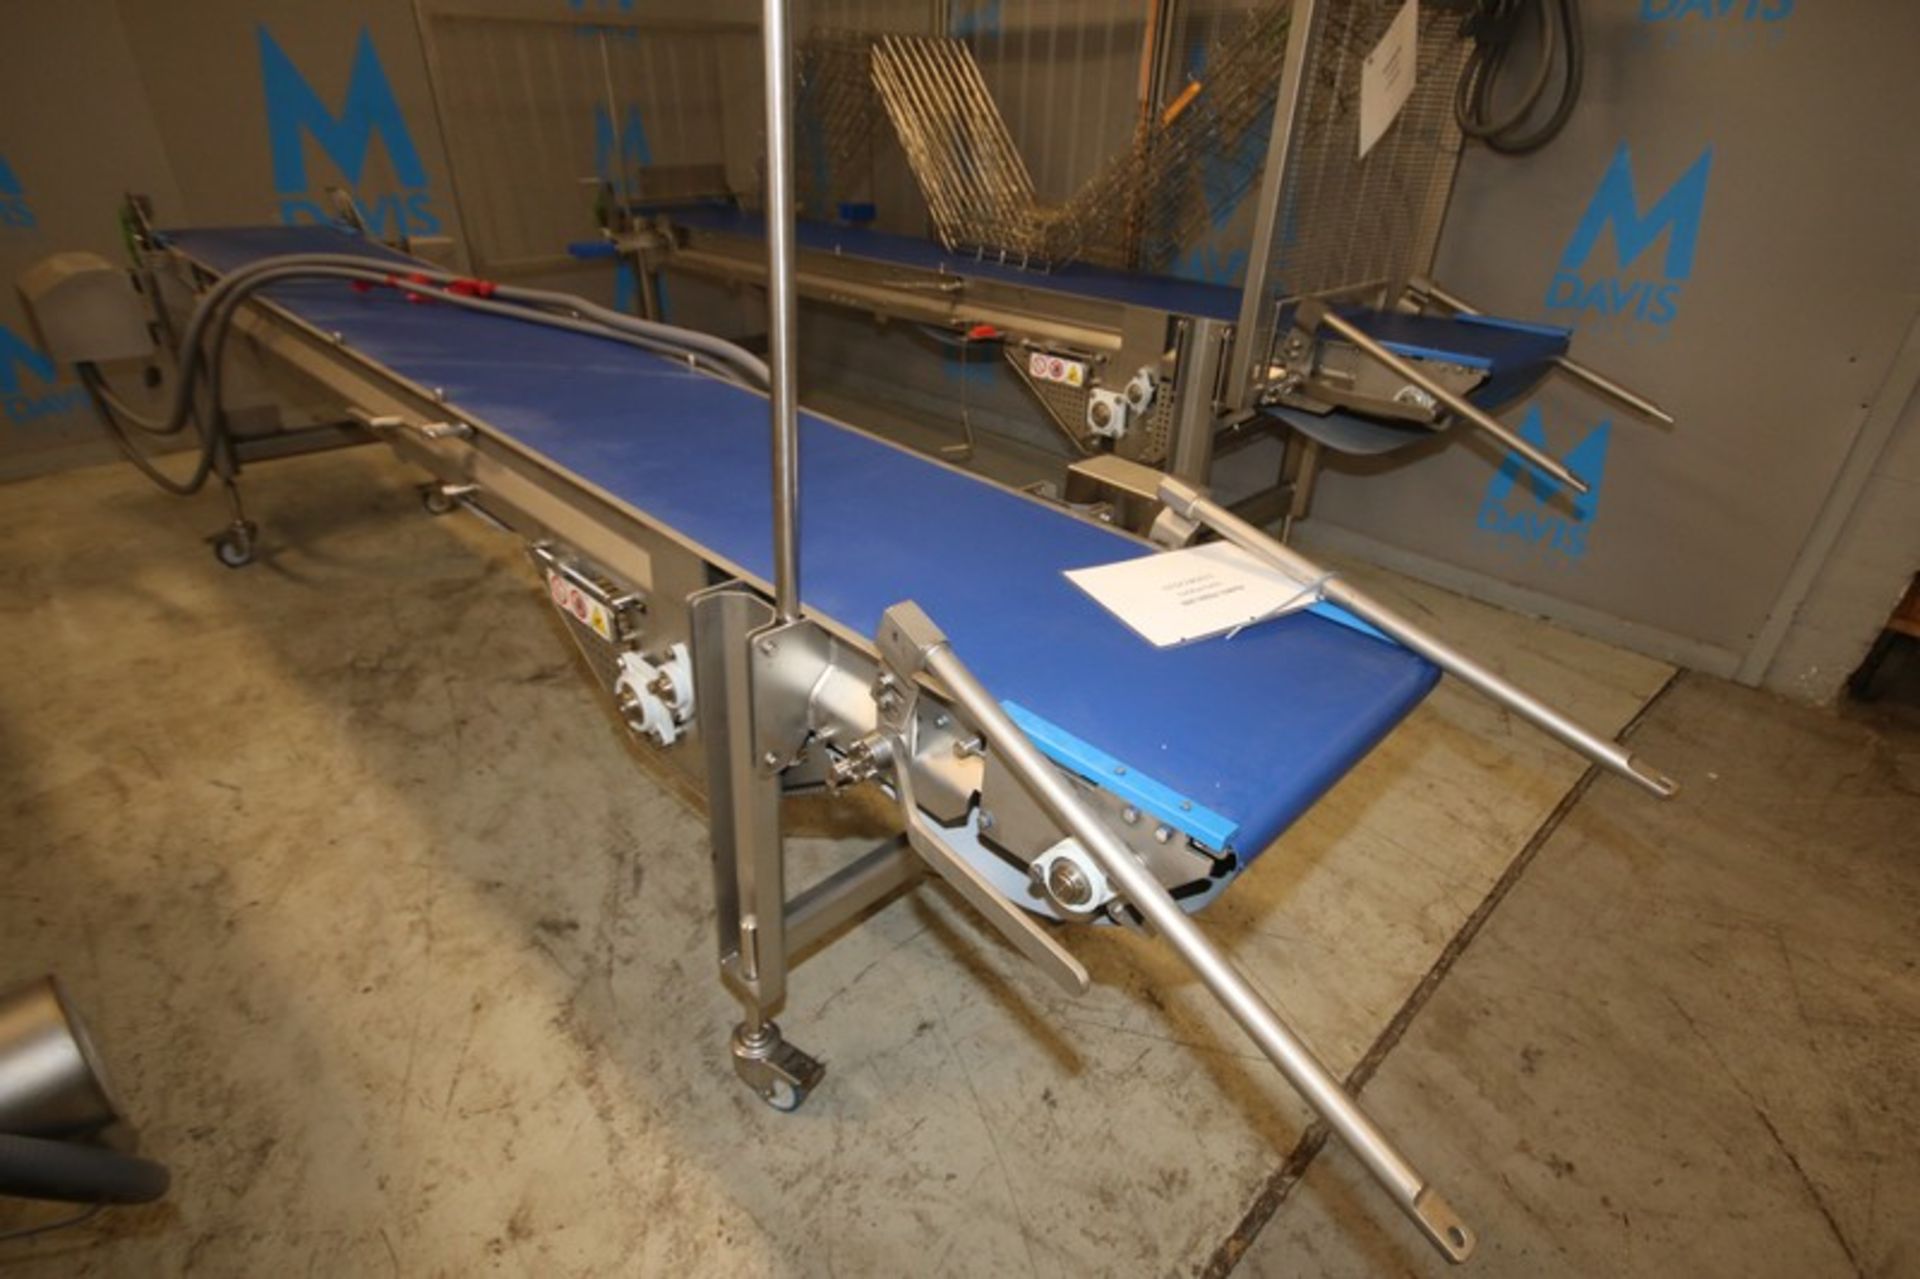 2019 Alimec Aprox. 149" L x 19.5" W x 33" H S/S Belt Conveyor, SN 813-59, with Bauer S/S Drive Motor - Image 2 of 4